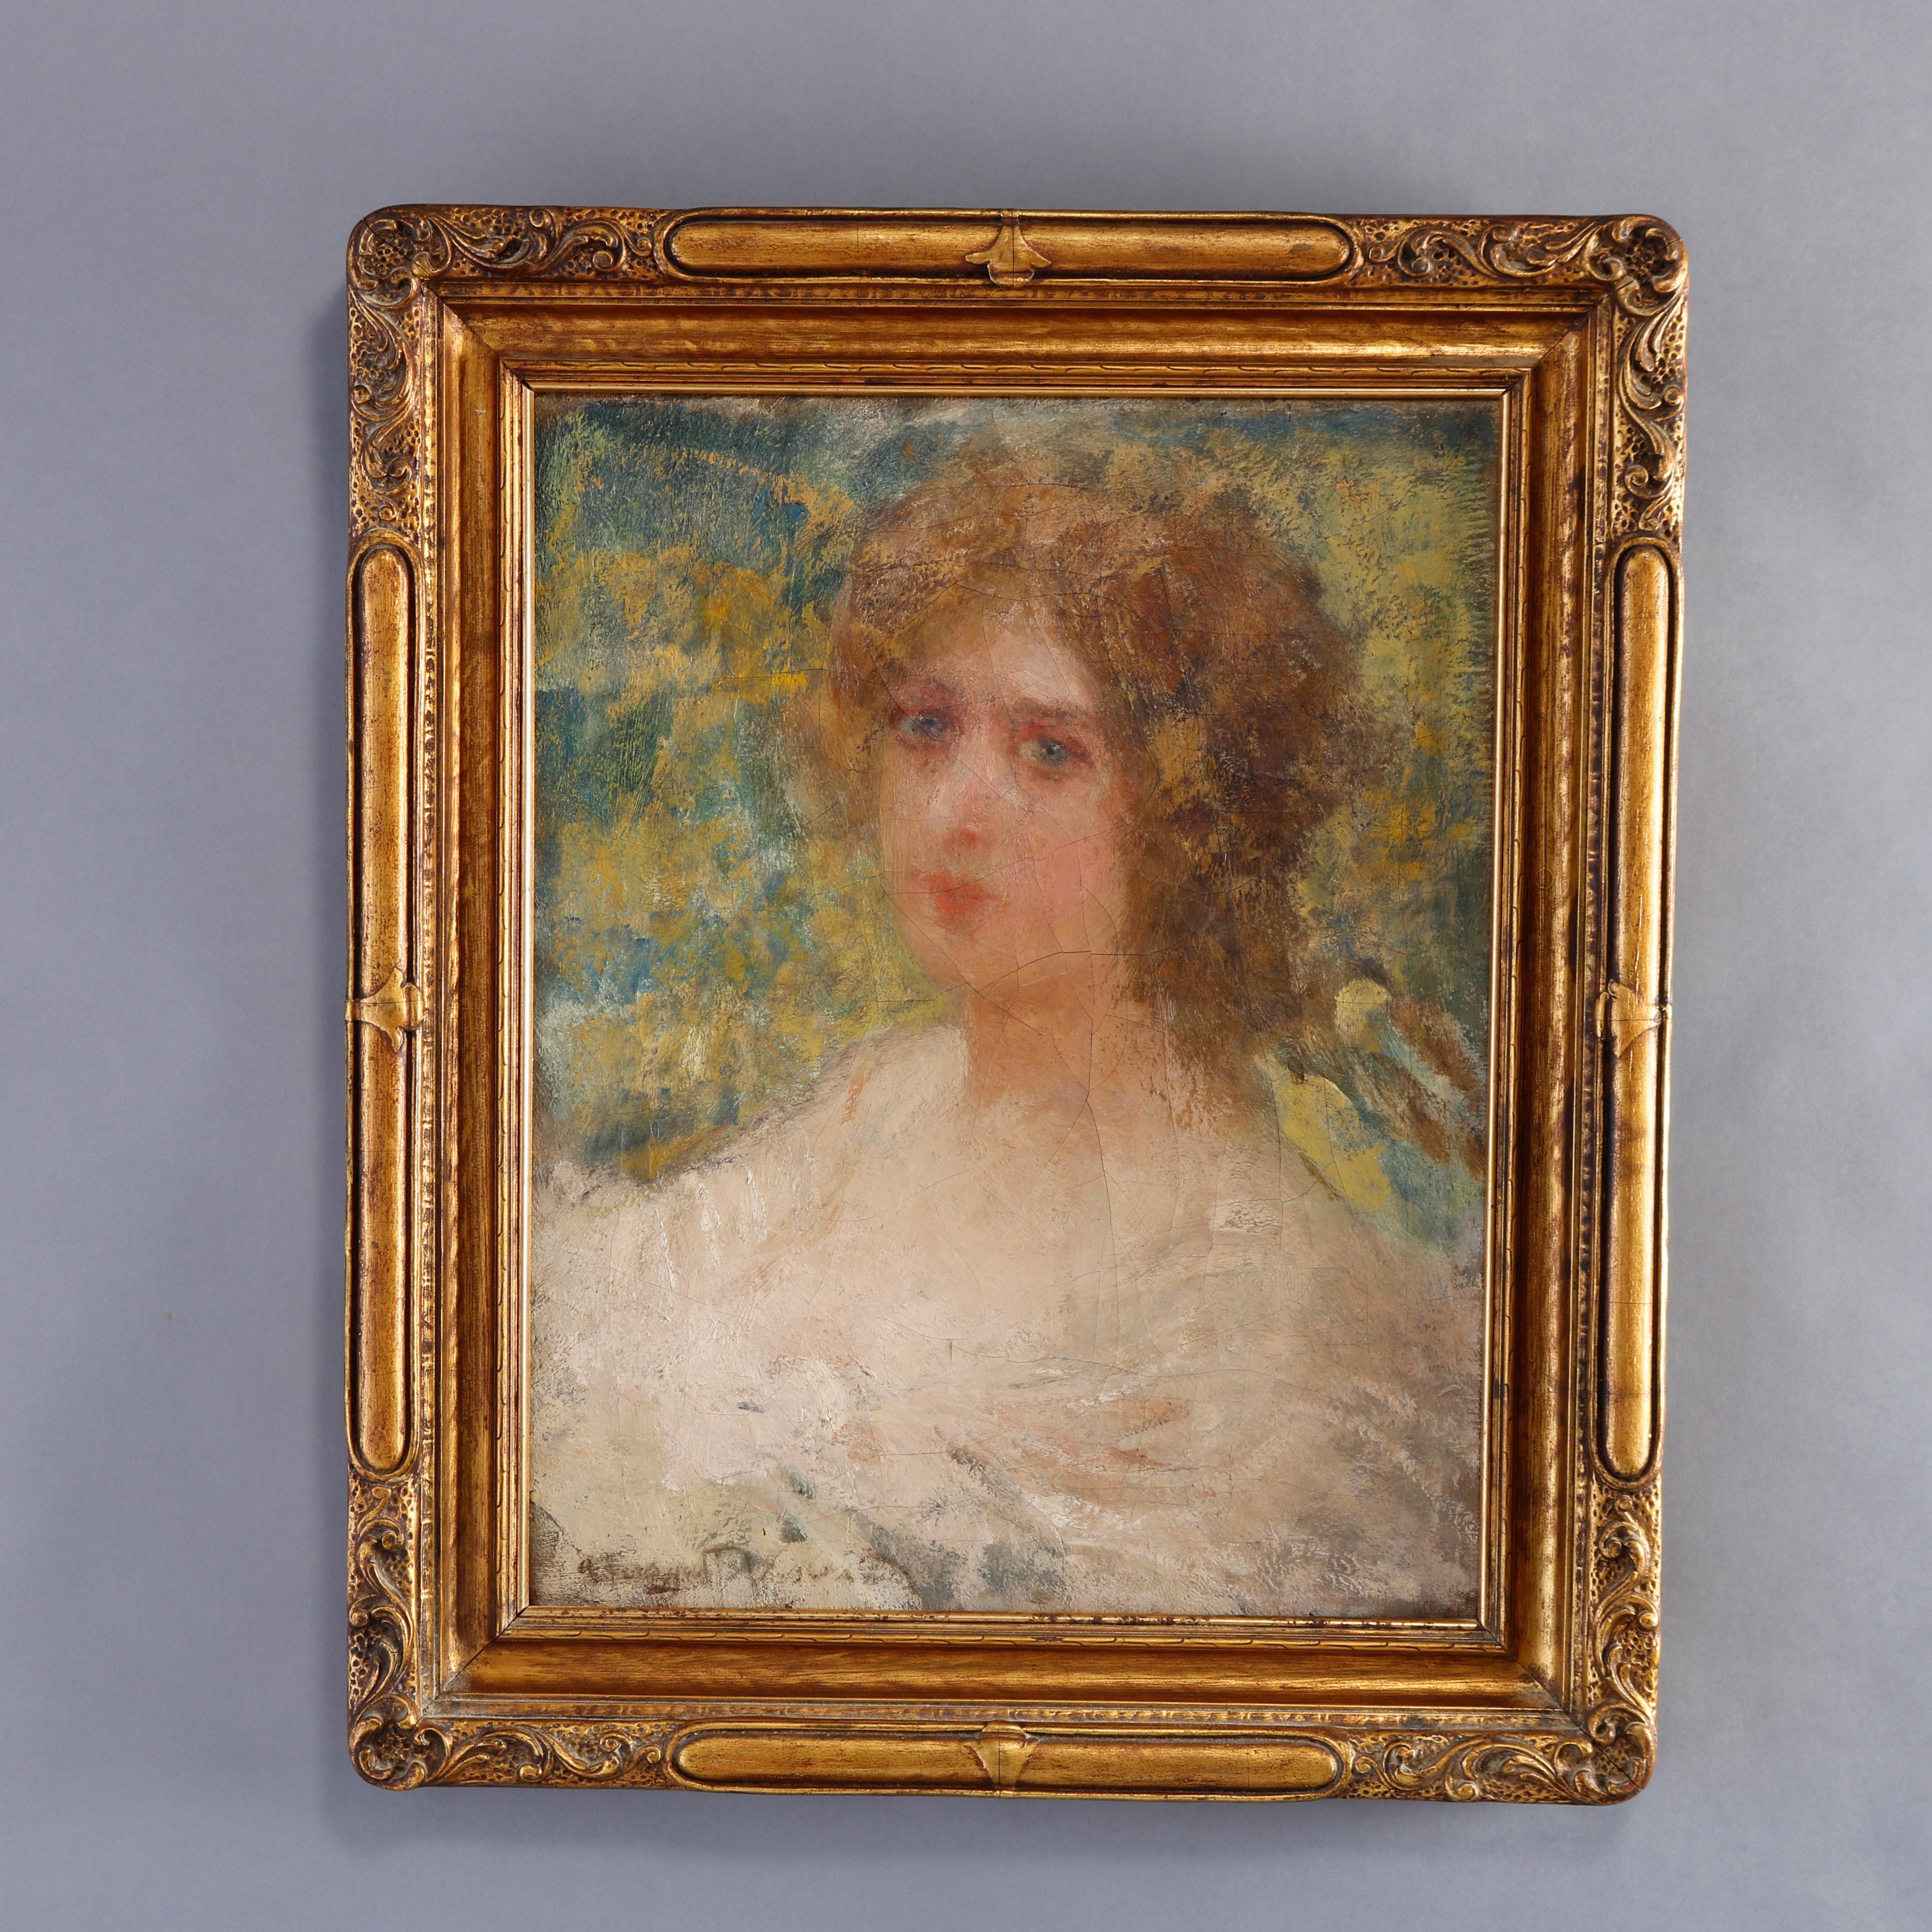 An antique Italian oil painting by Adolfo Visconti offers oil on canvas impressionist portrait of a lady, artist signed lower left, seated in giltwood frame, c1900

Measures- 28.75''h x 23.75''w x 2.5''d

Additional Information:
Adolfo